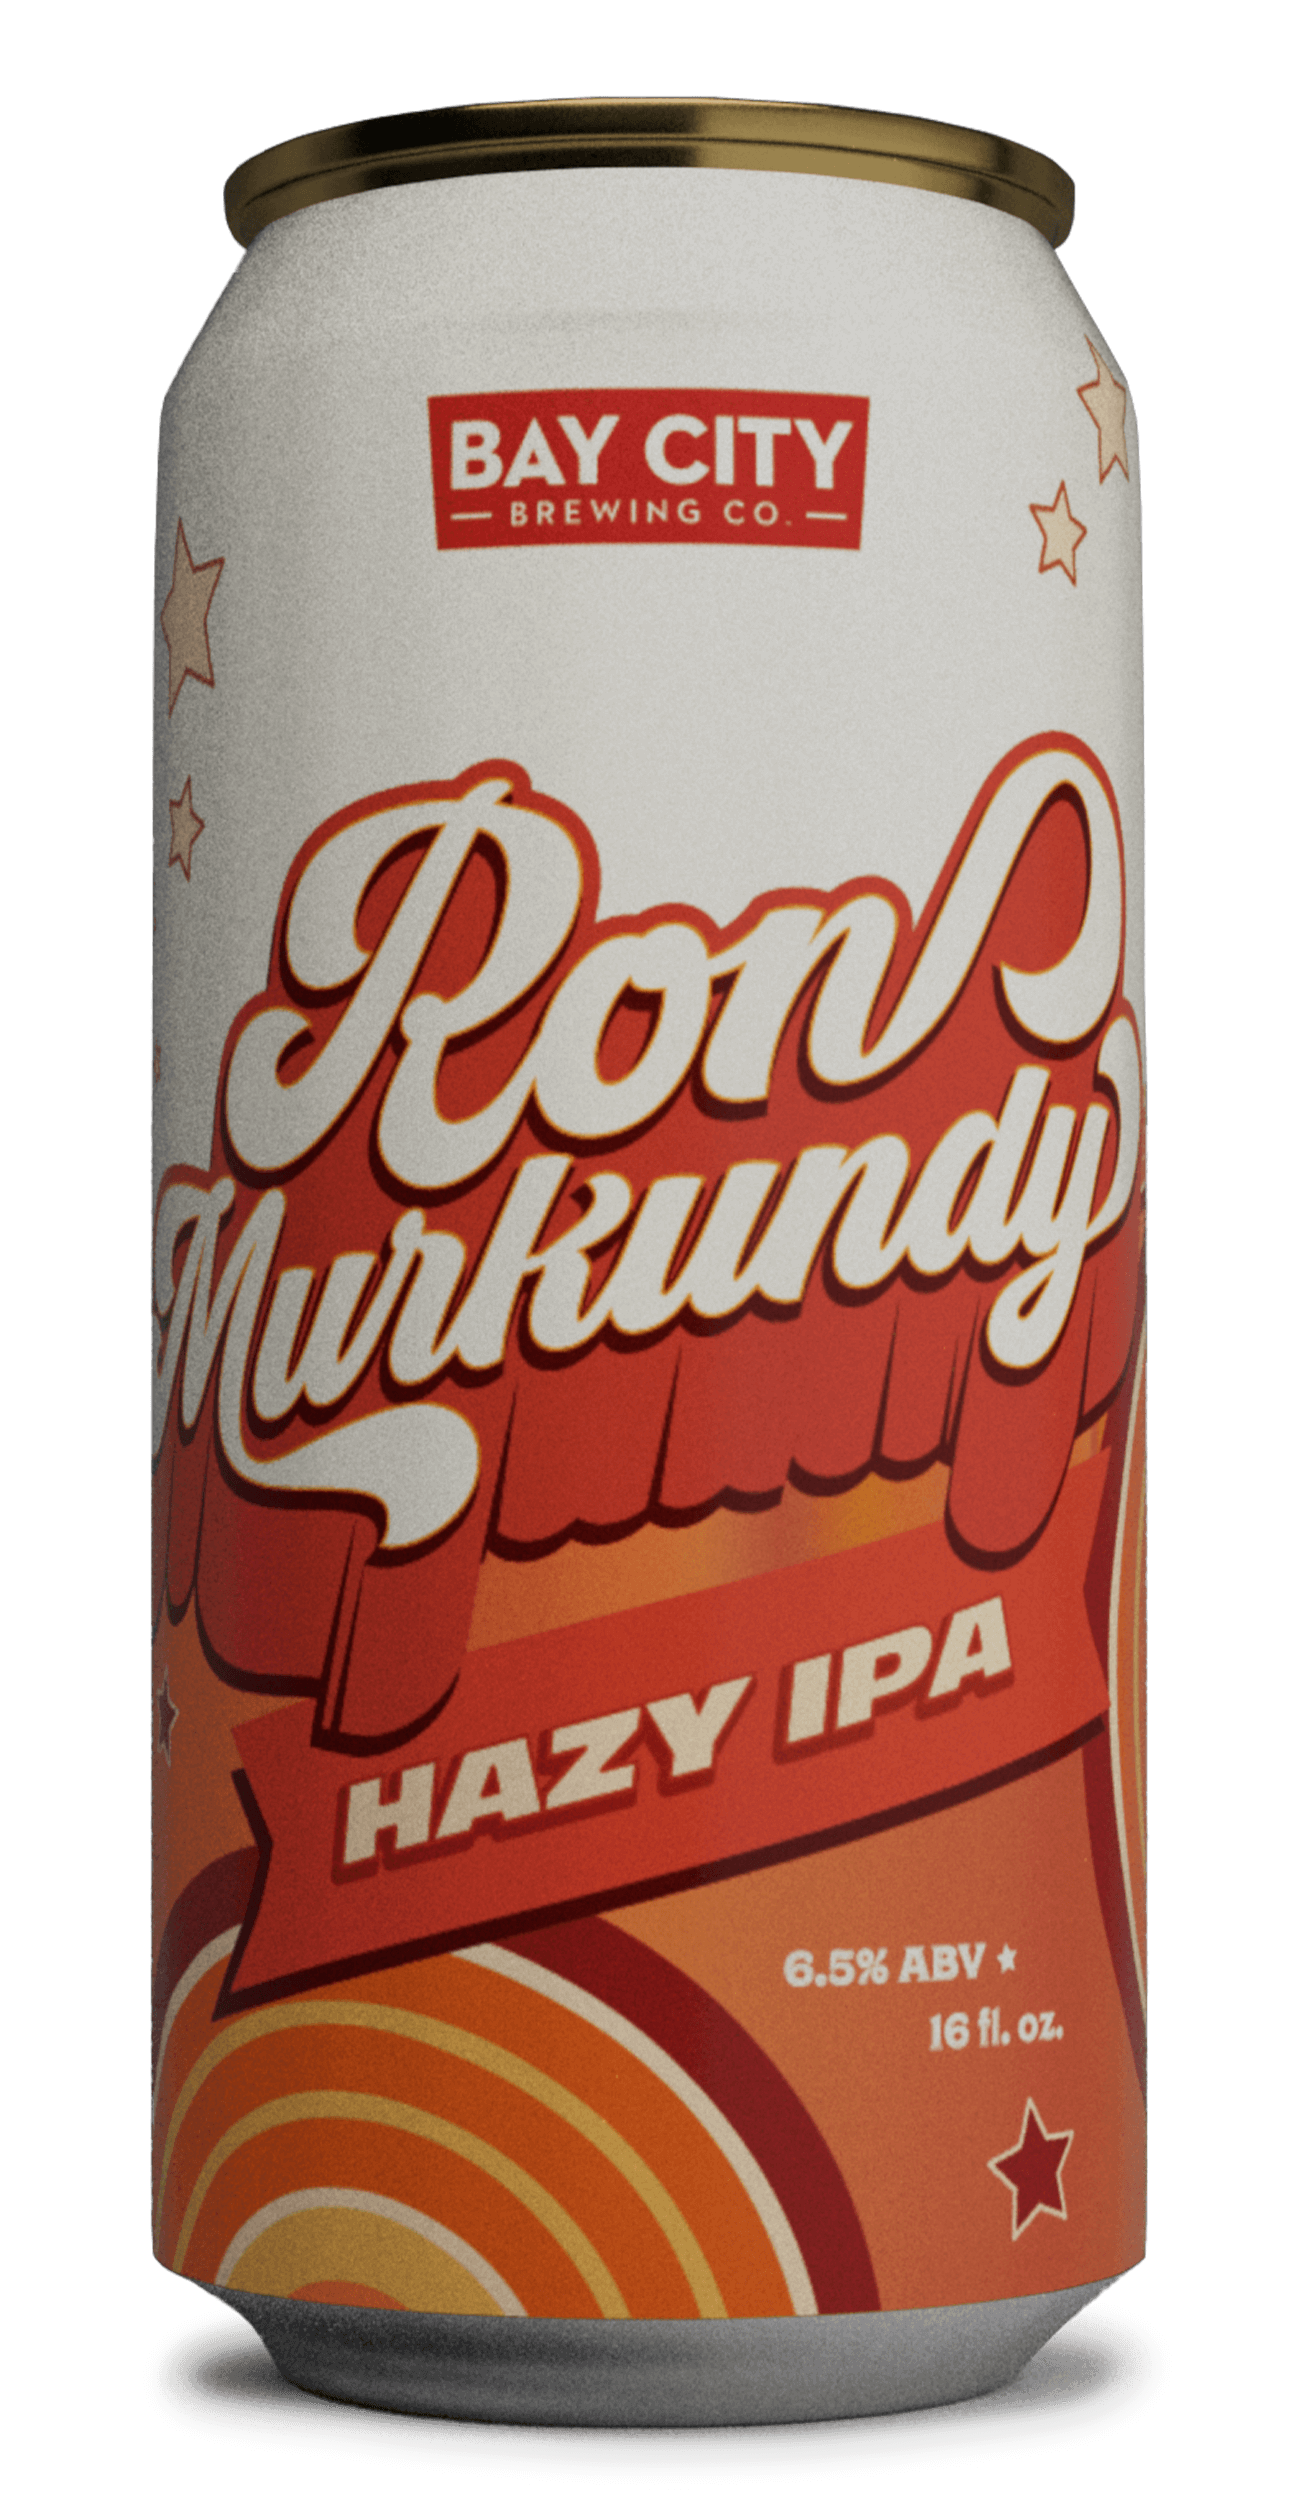 Ron Murkundy Can - Bay City Brewery